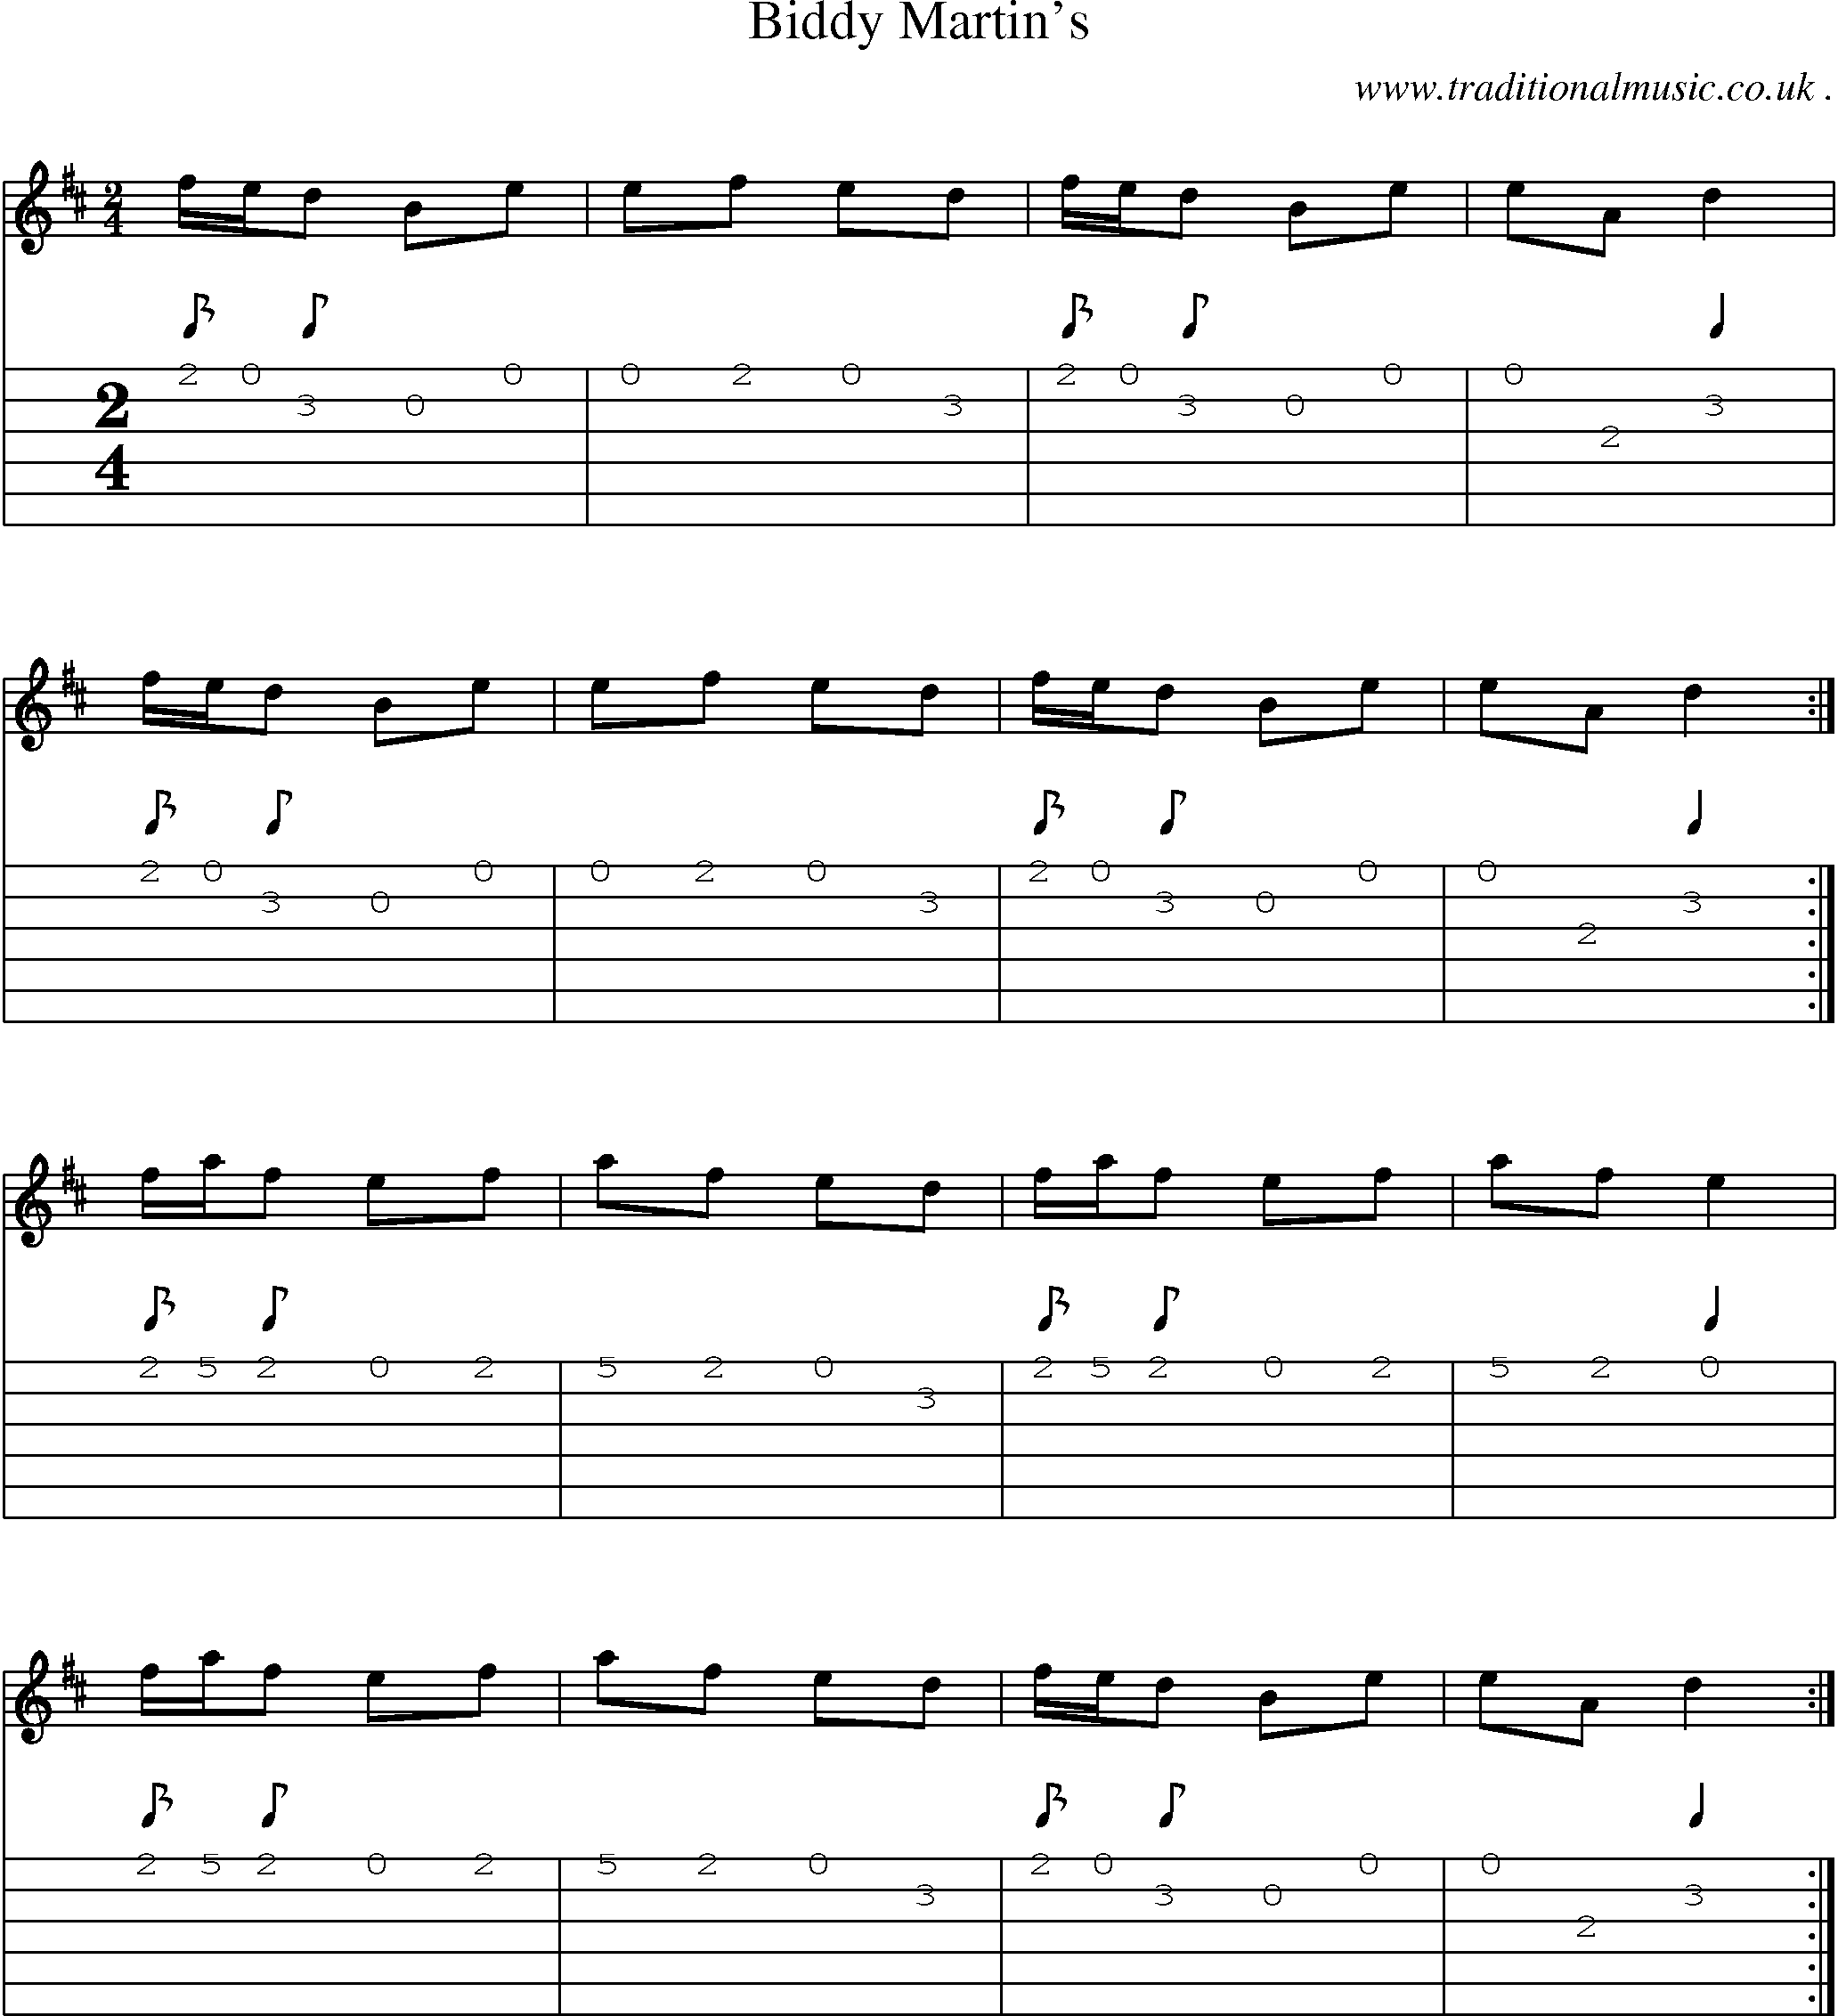 Sheet-Music and Guitar Tabs for Biddy Martins